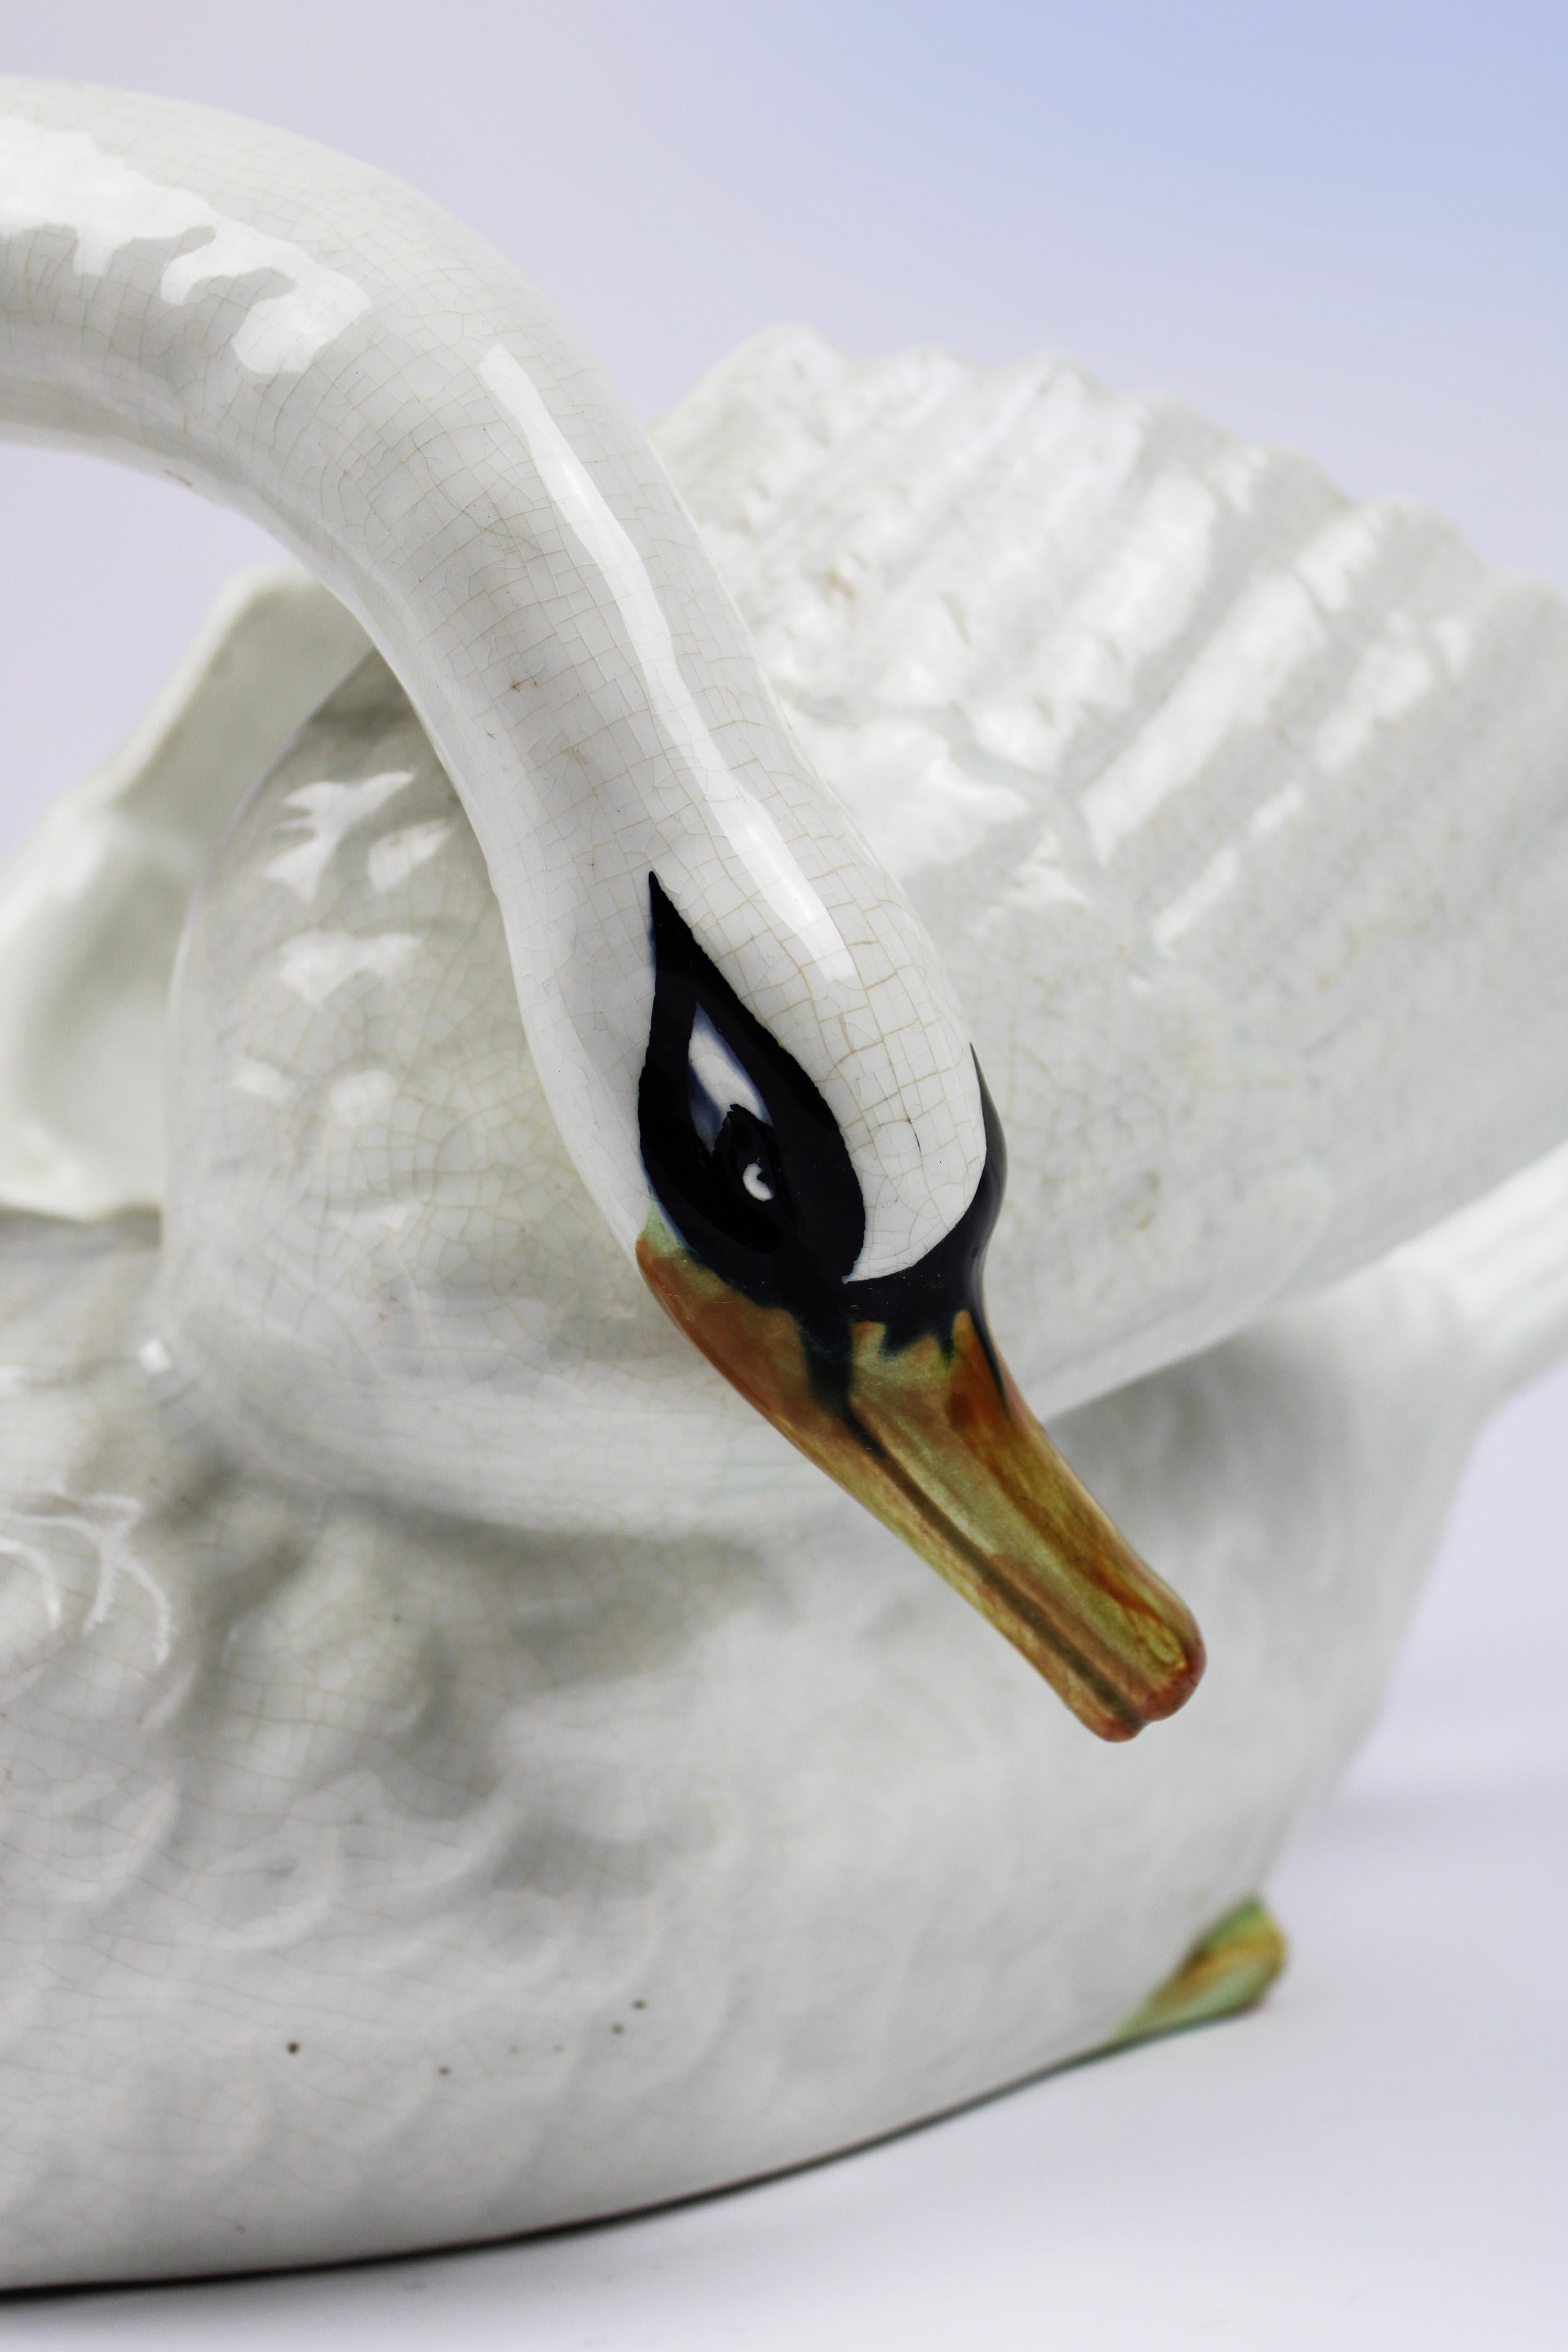 Step into the enchanting world of Art Nouveau with this exquisite Off-White Swan Jardinière from Belgium, crafted in 1900 and stamped with the mark of Imeriale Nimy. This majestic piece of majolica pottery embodies the quintessential elegance of the